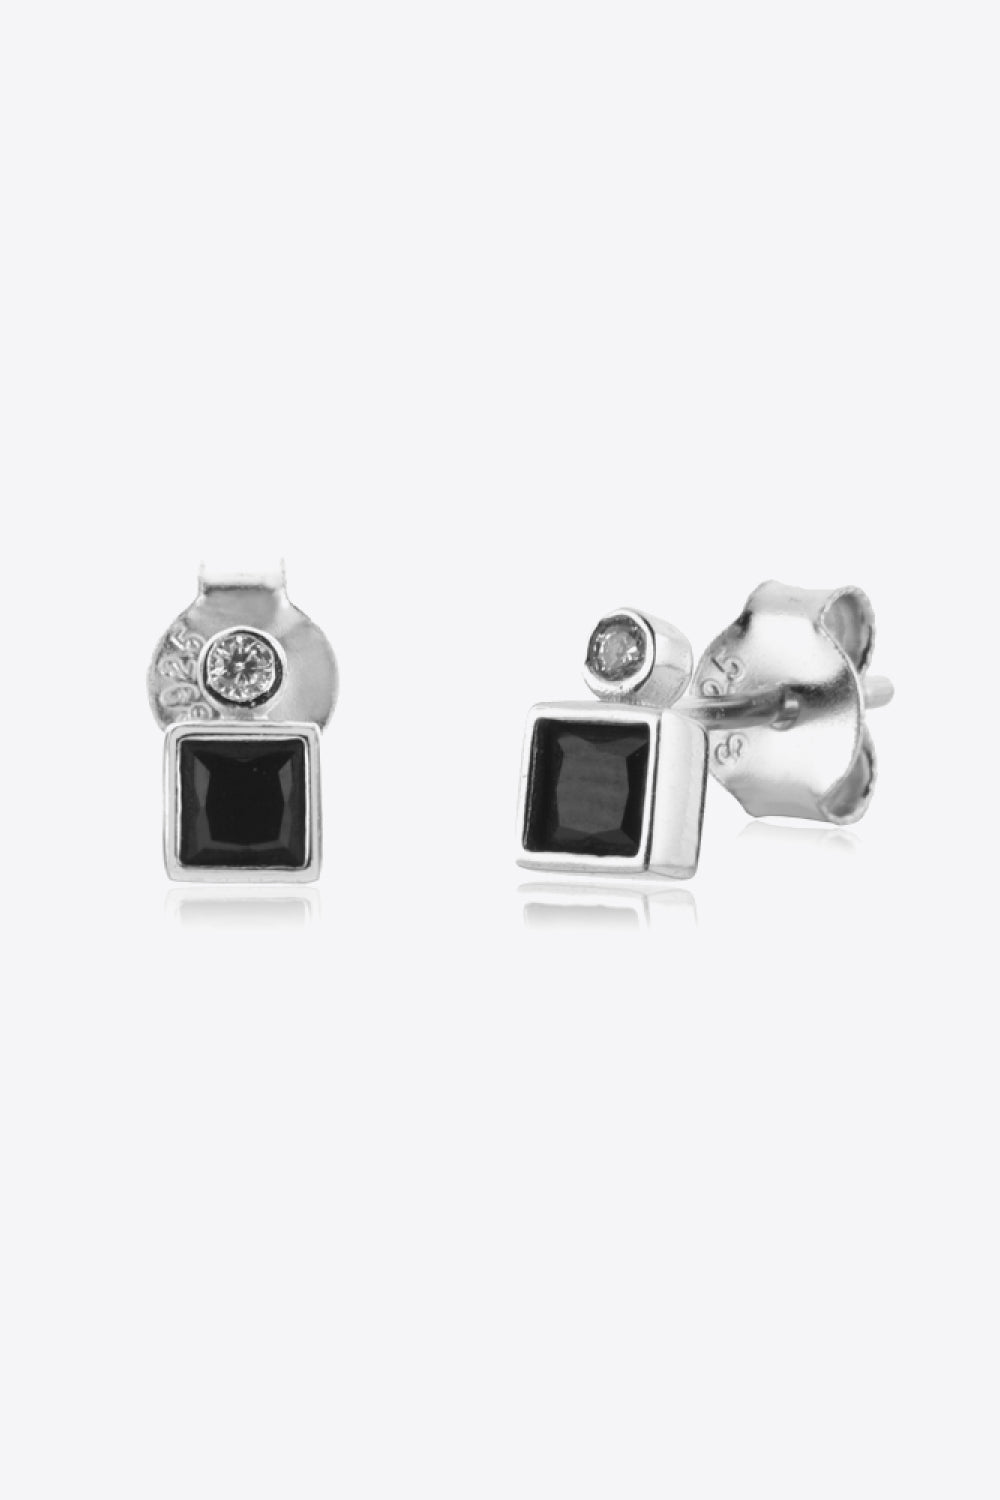 Inlaid Zircon Square 925 Sterling Silver Earrings - Earrings - FITGGINS